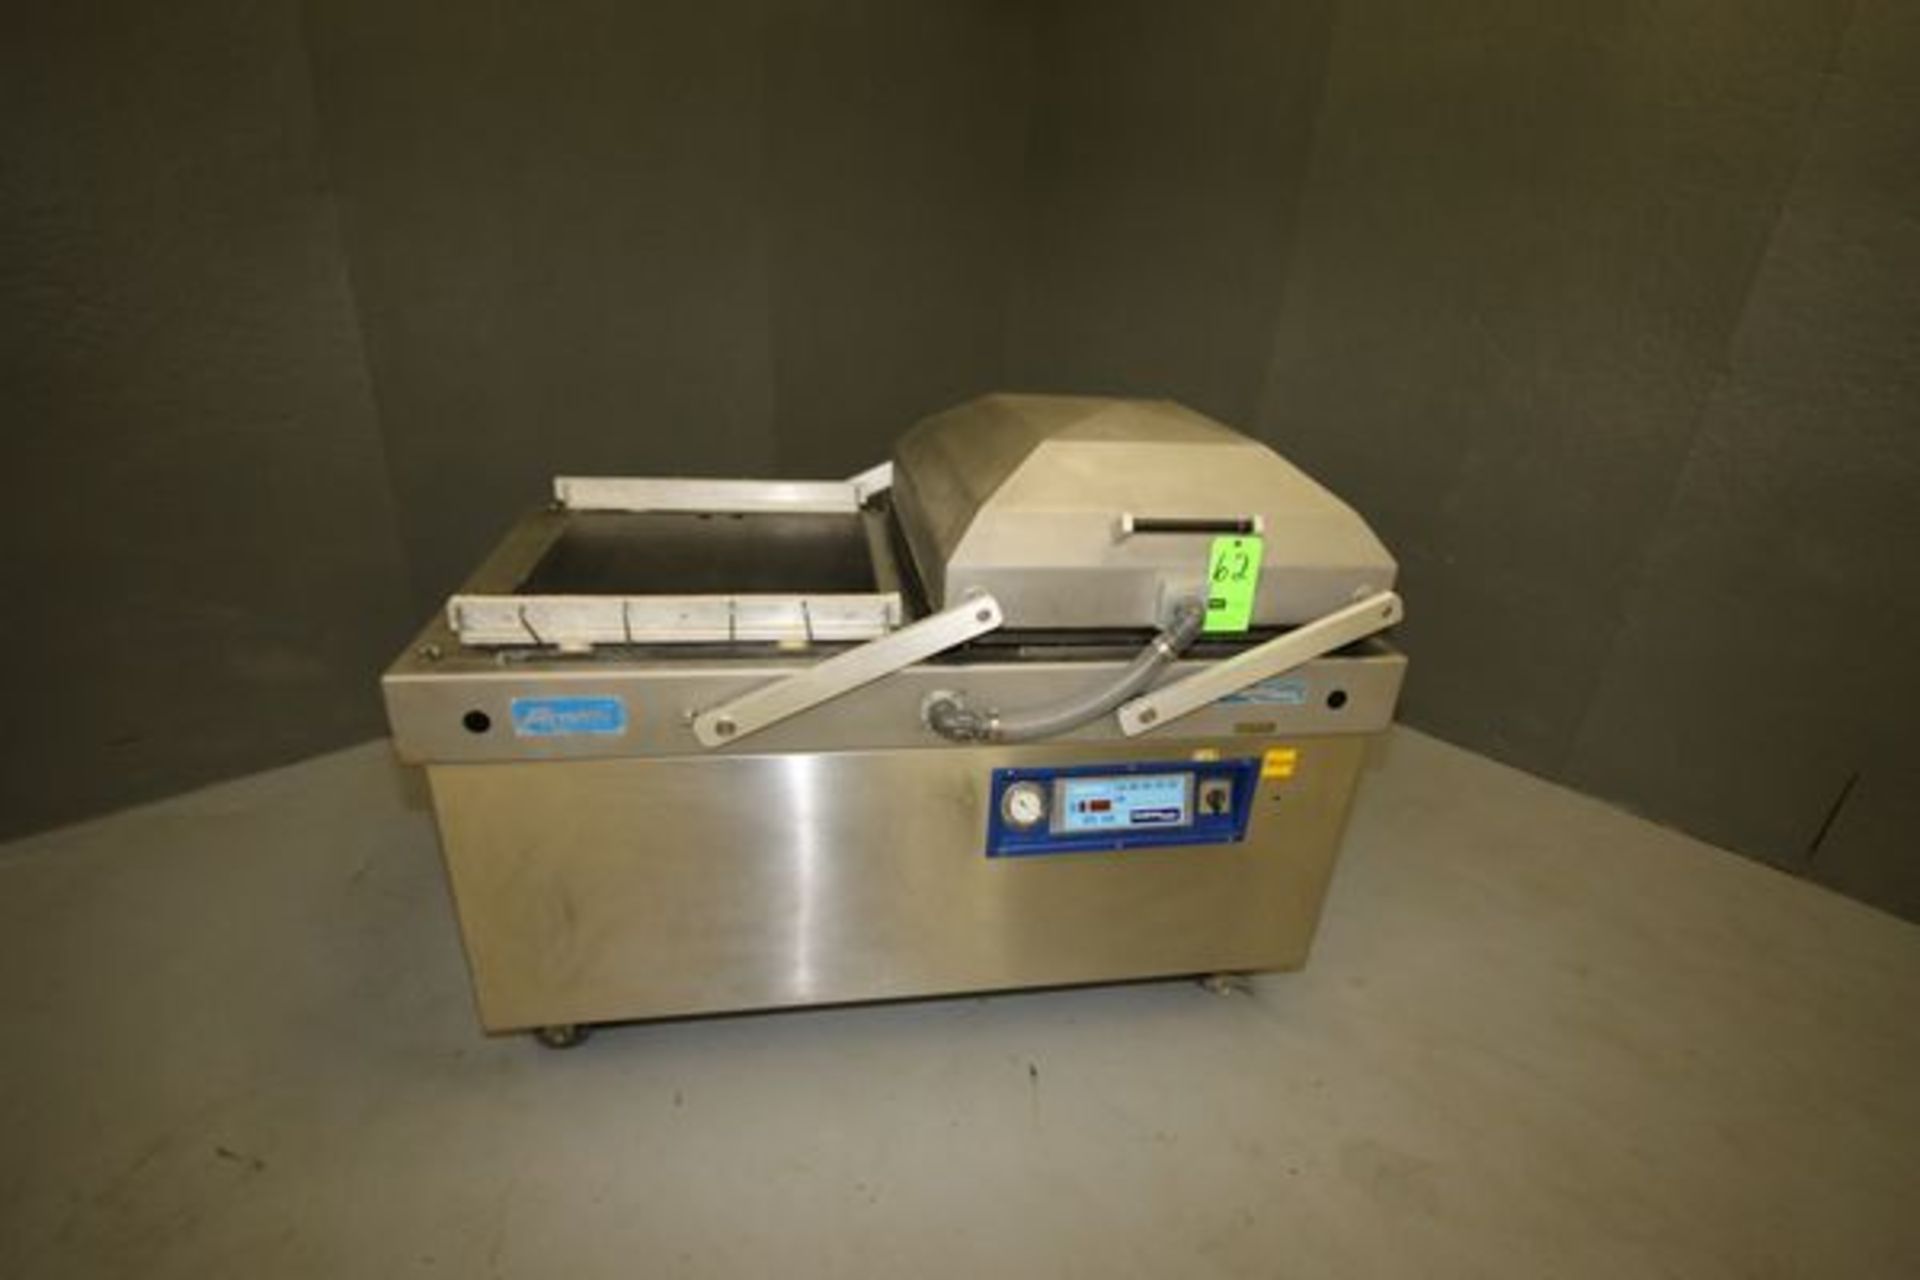 Smith SuperVac Dual Vacuum Sealer, Type GK290 with Seal Platform Dimension: Aprox. 24" x 24", 460